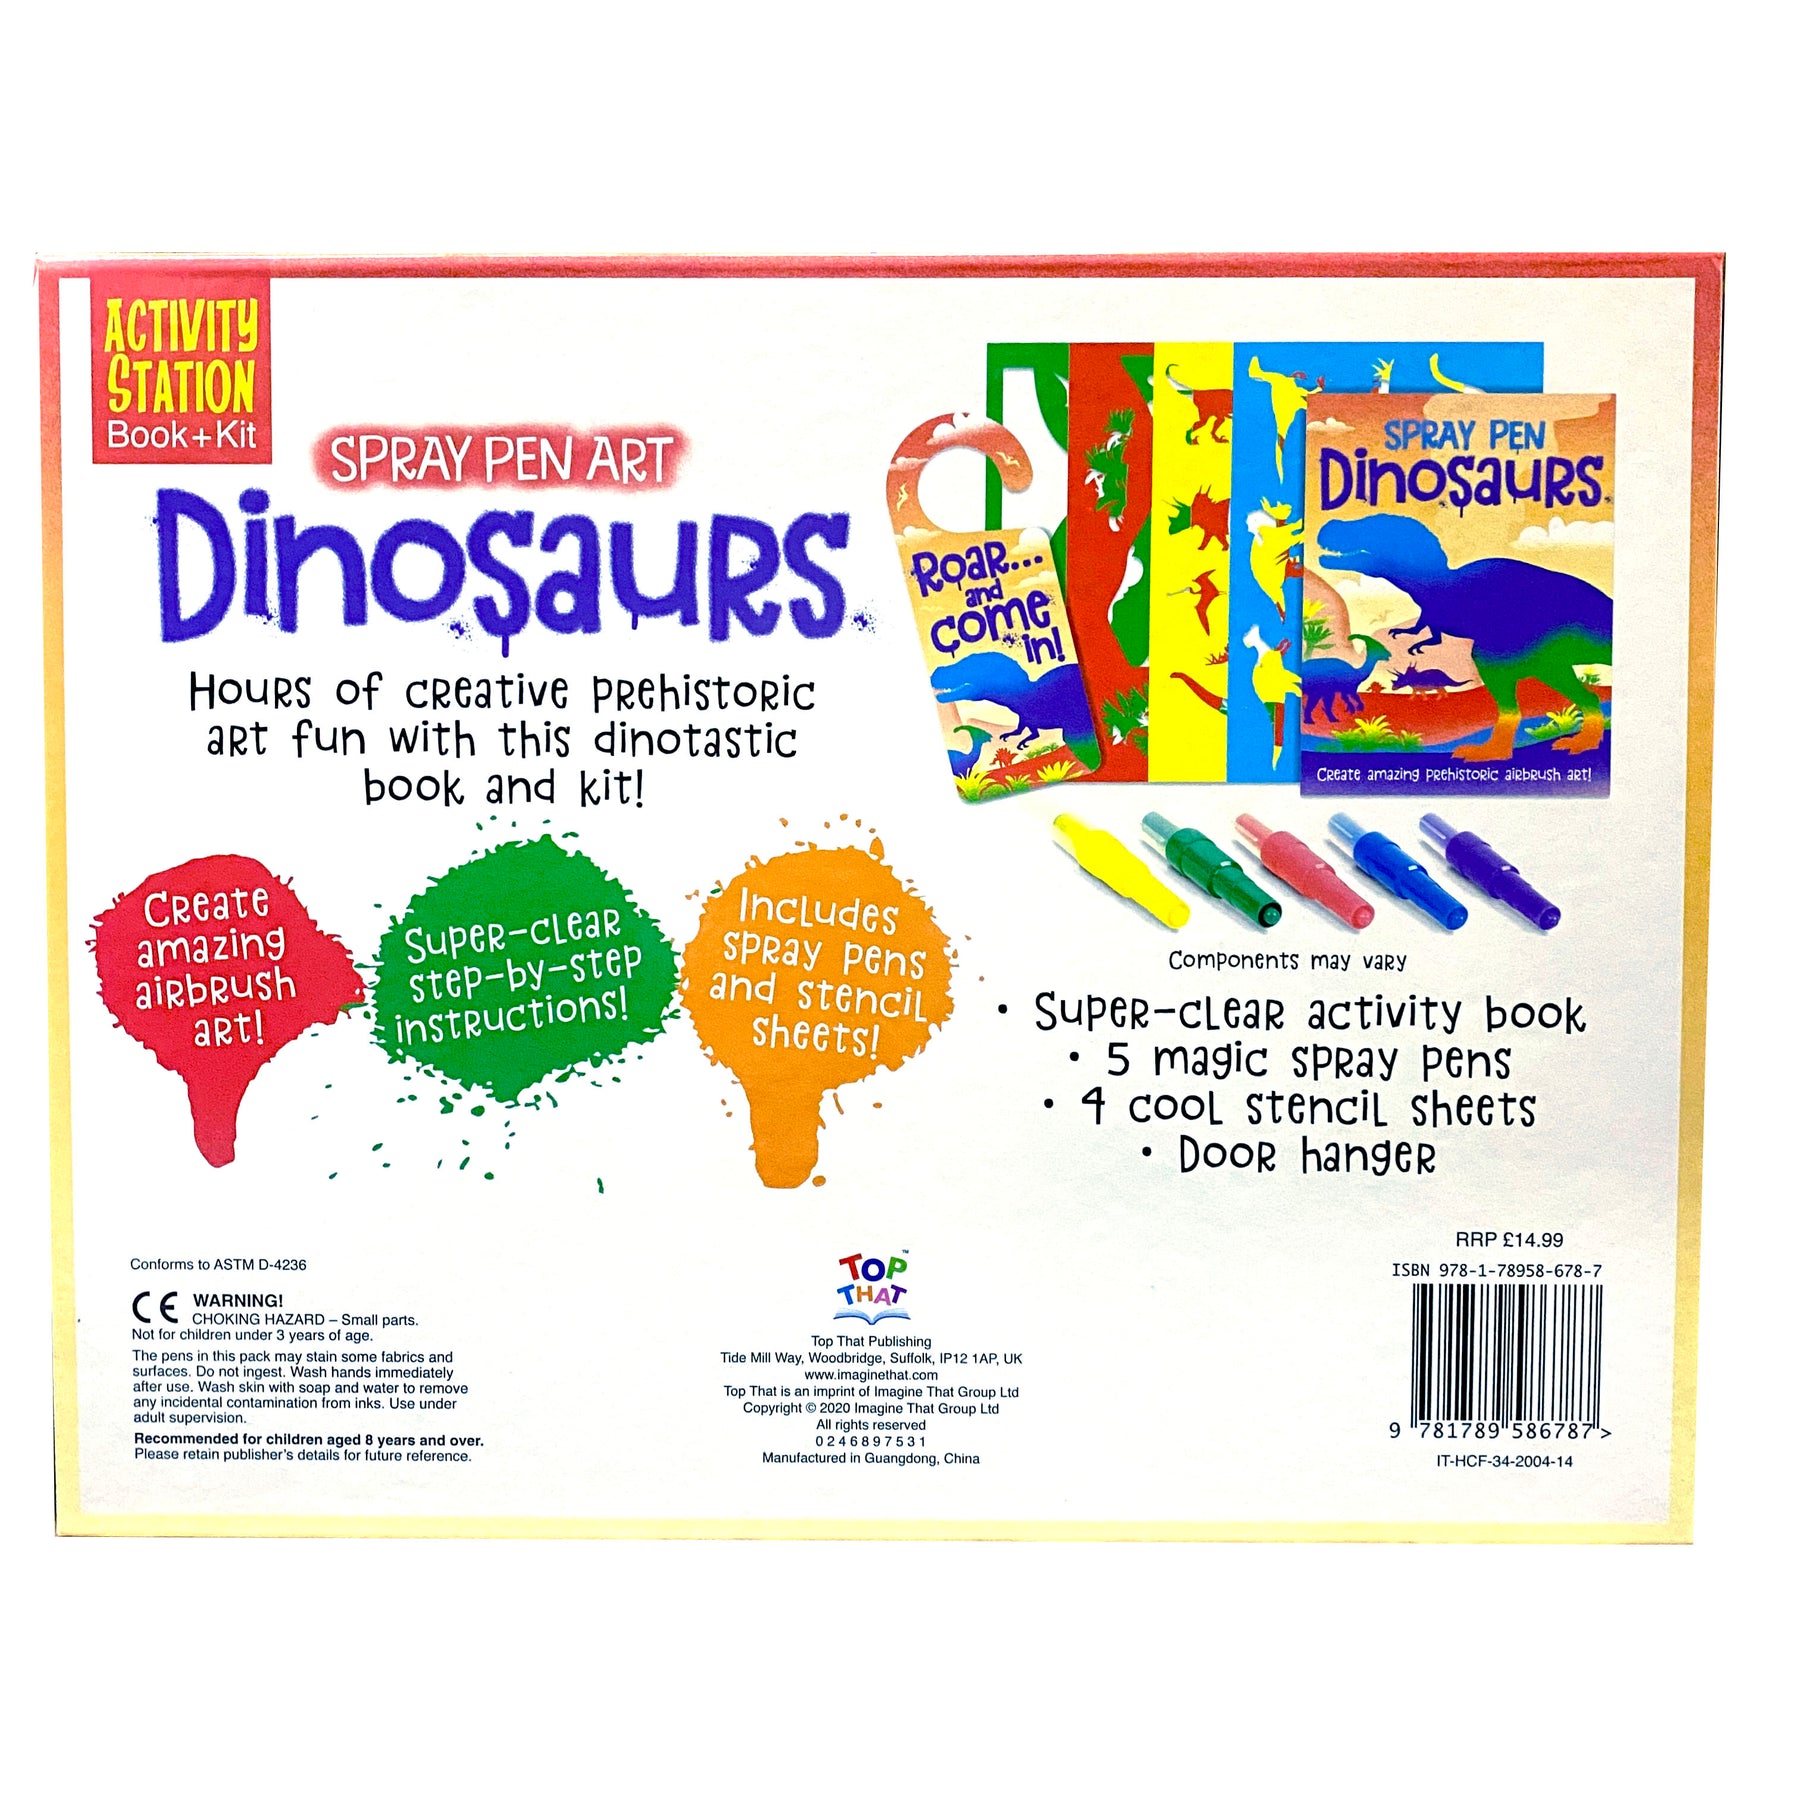 WERNNSAI Dinosaur Marker Set with Pencil Case - 56 PCS Scented Markers for  Kids Boys Birthday Christmas Gift Painting Coloring Markers Pens Set Art